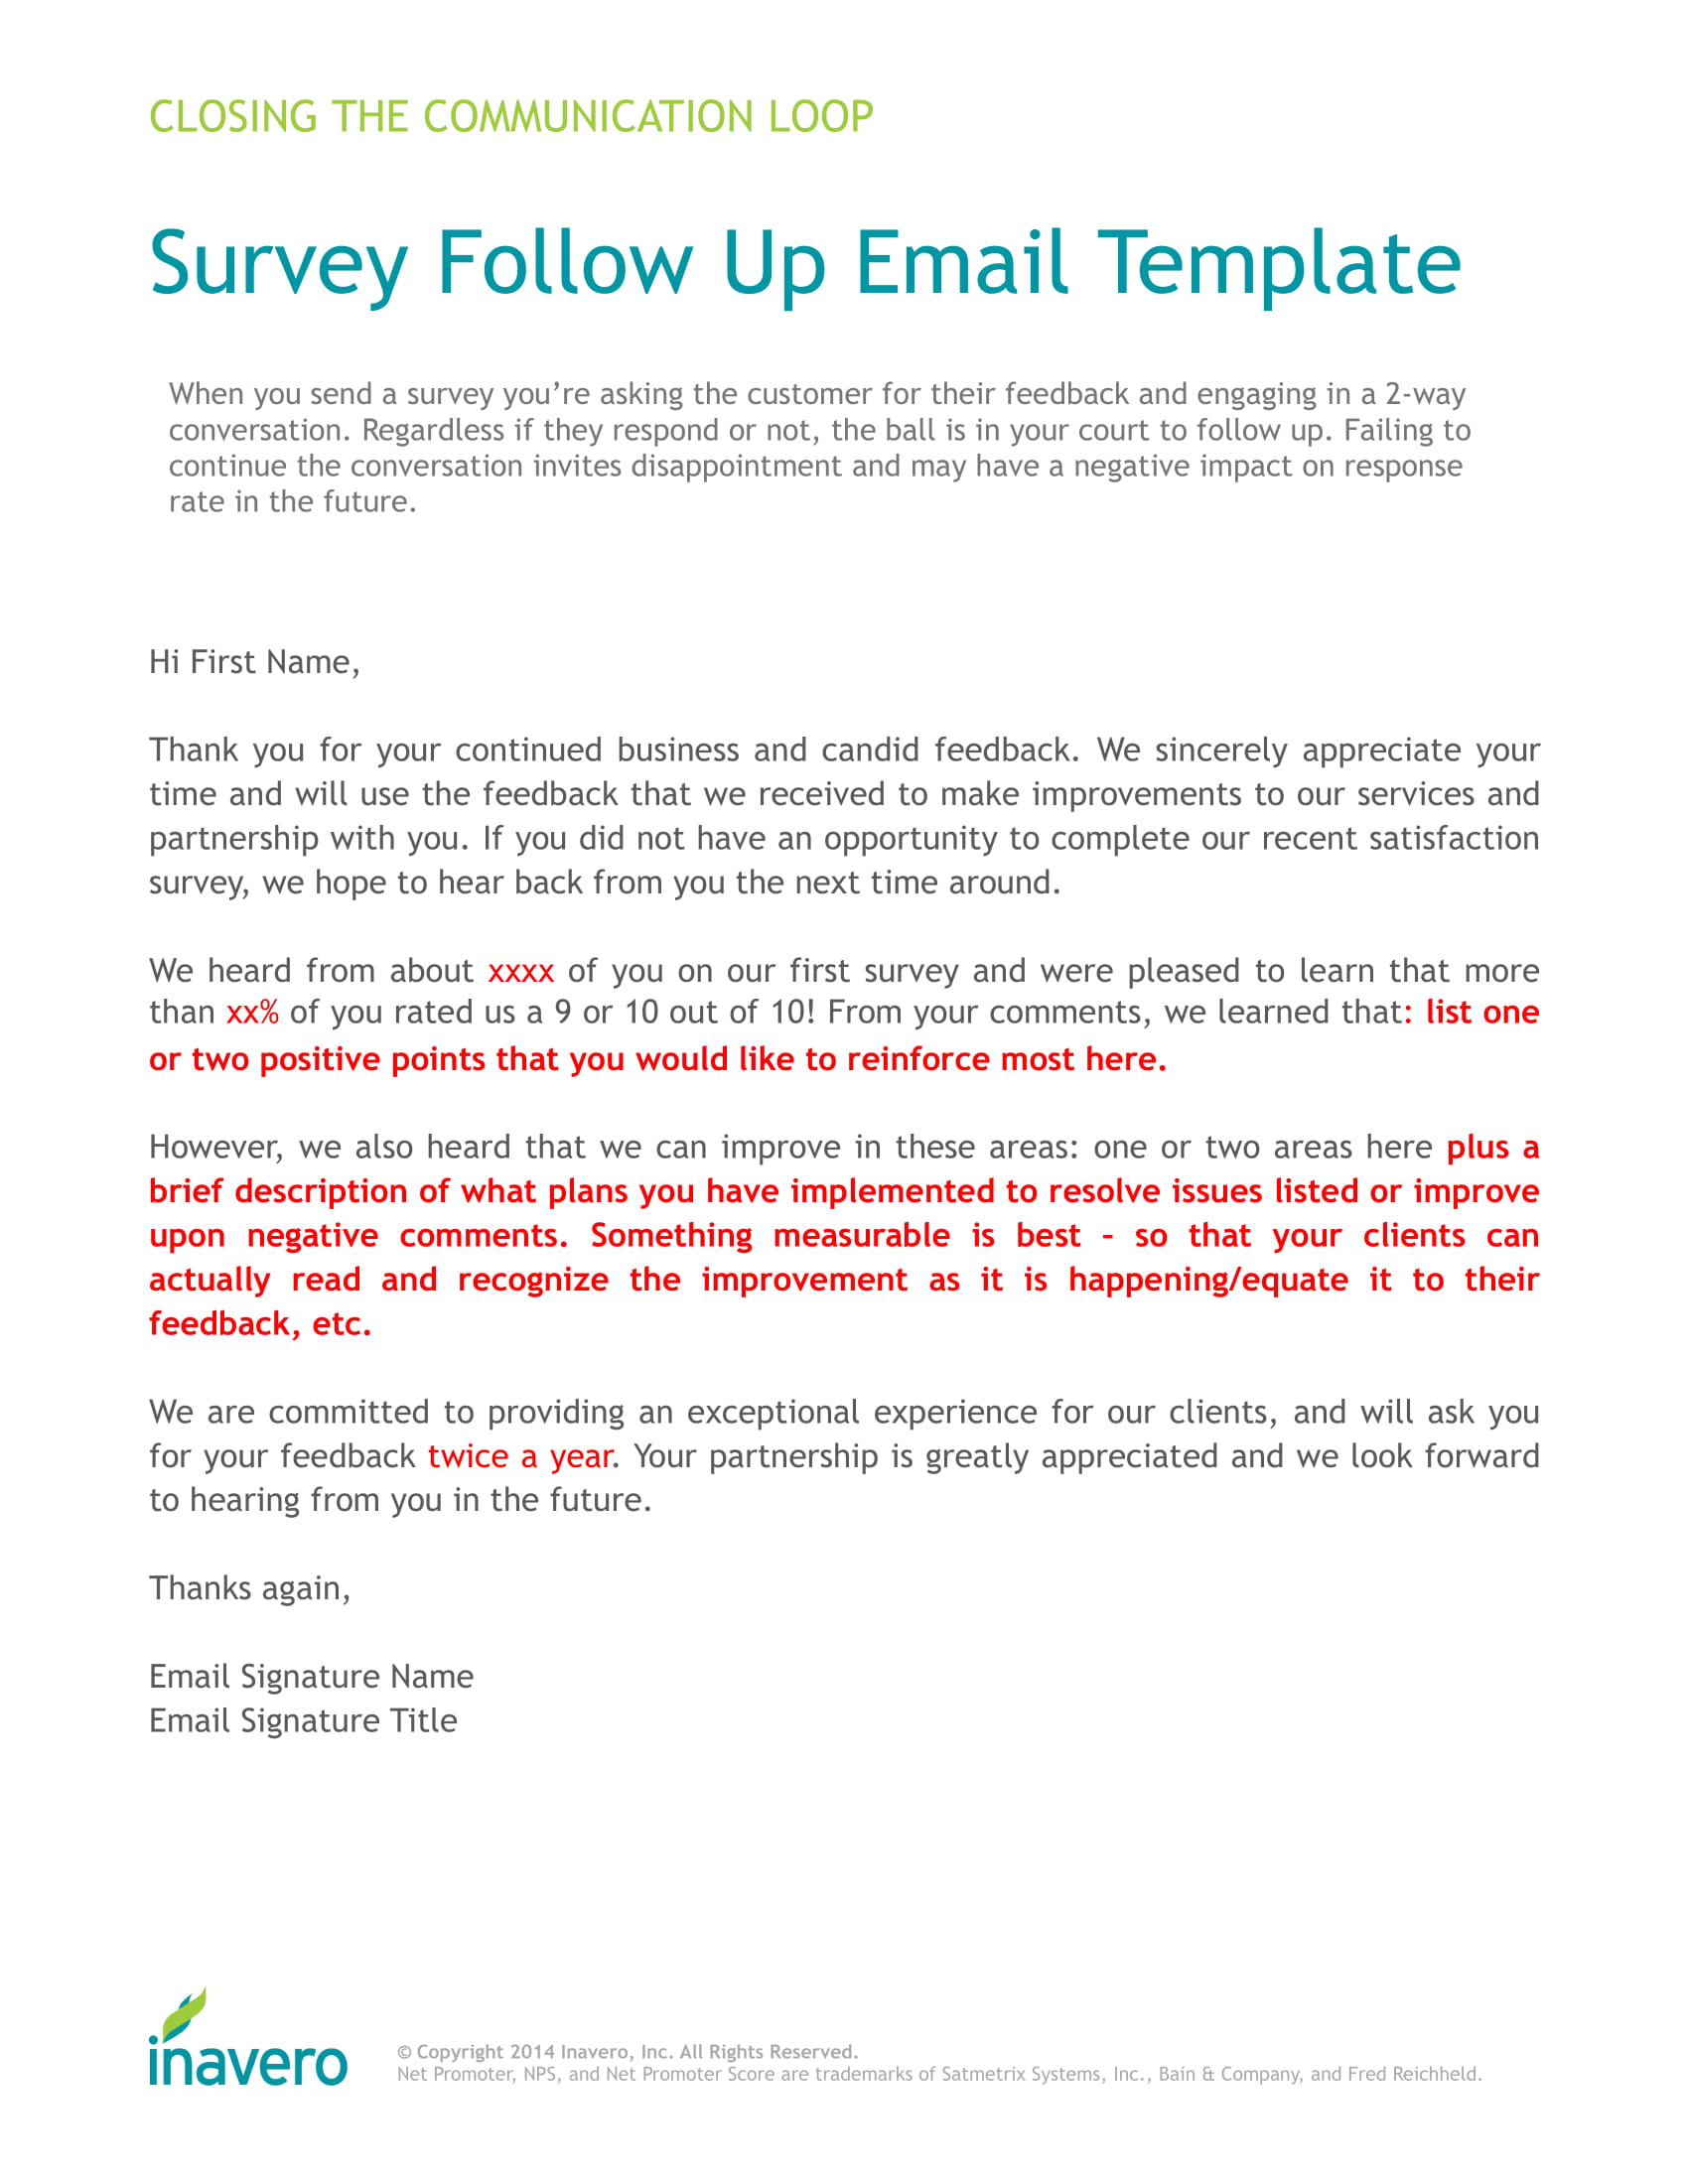 survey follow up email template format 1